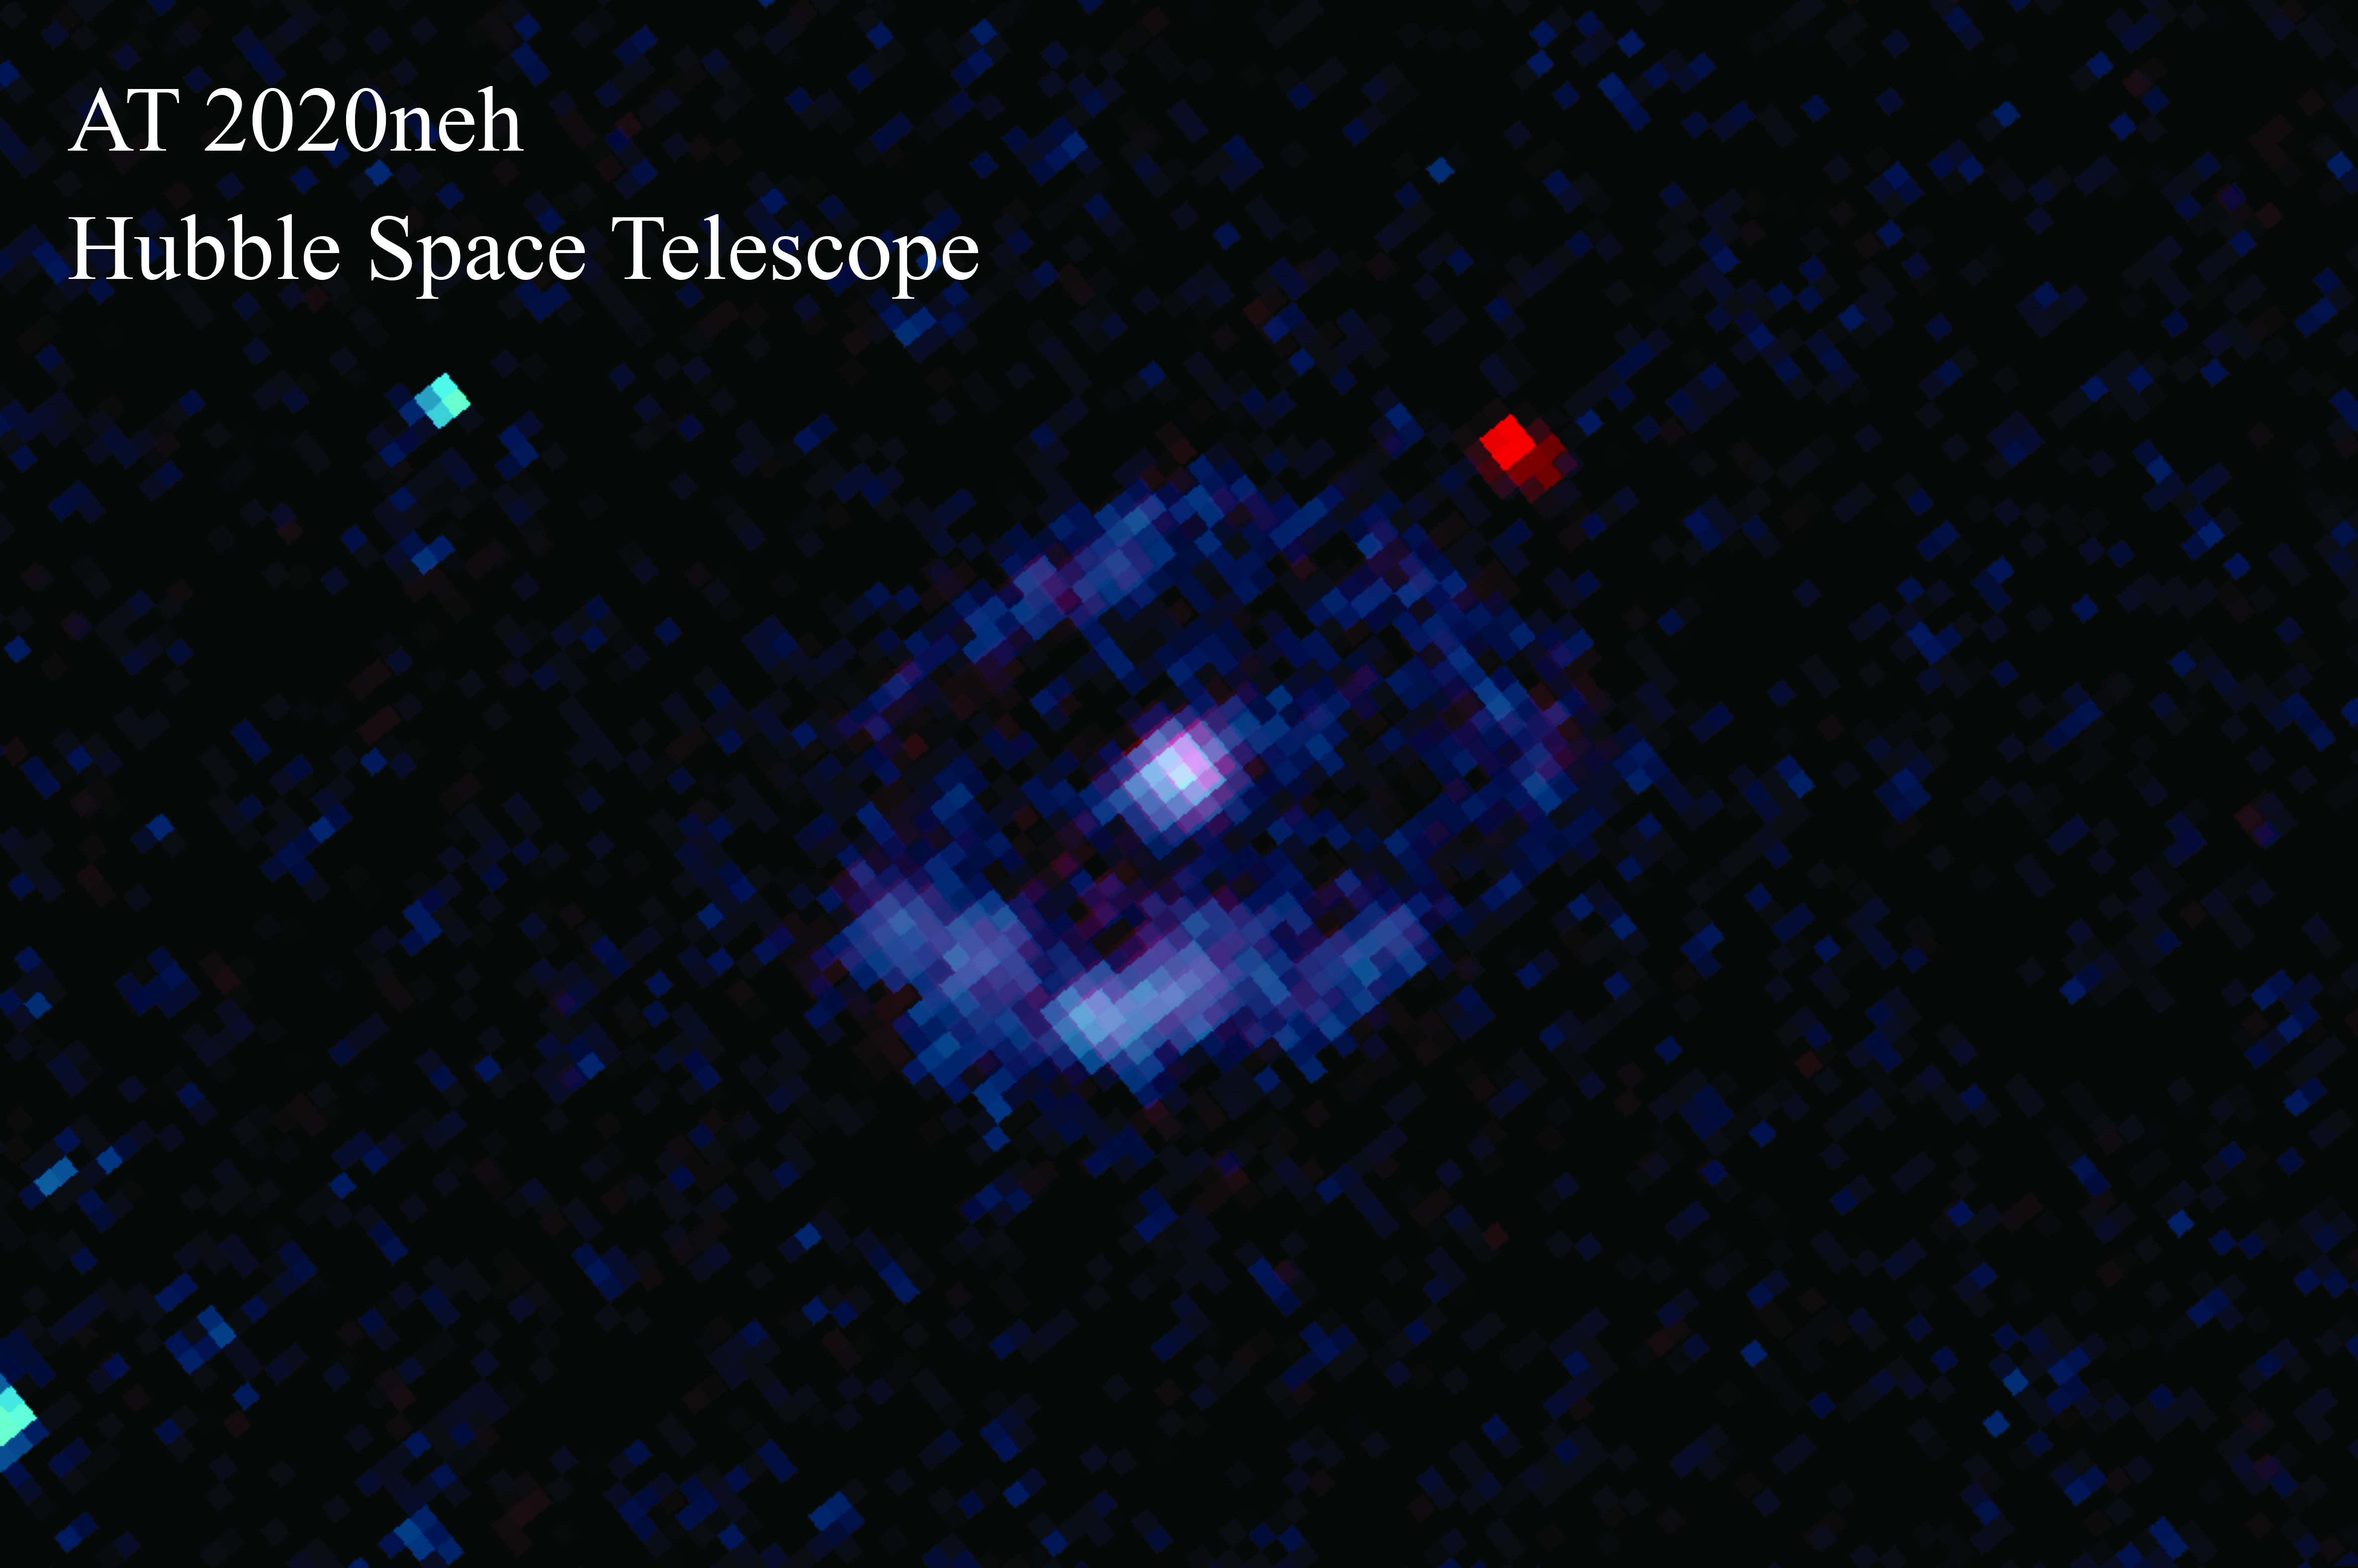 Astronomers discovered a star ripped apart by a black hole in the galaxy SDSS J152120.07+140410.5, located 850 million light-years away.  Researchers pointed NASA's Hubble Space Telescope to investigate the aftermath, dubbed AT 2020neh, which is shown in the center of the image.  Hubble's ultraviolet camera saw a ring of stars form around the galaxy's core where AT 2020neh resides.